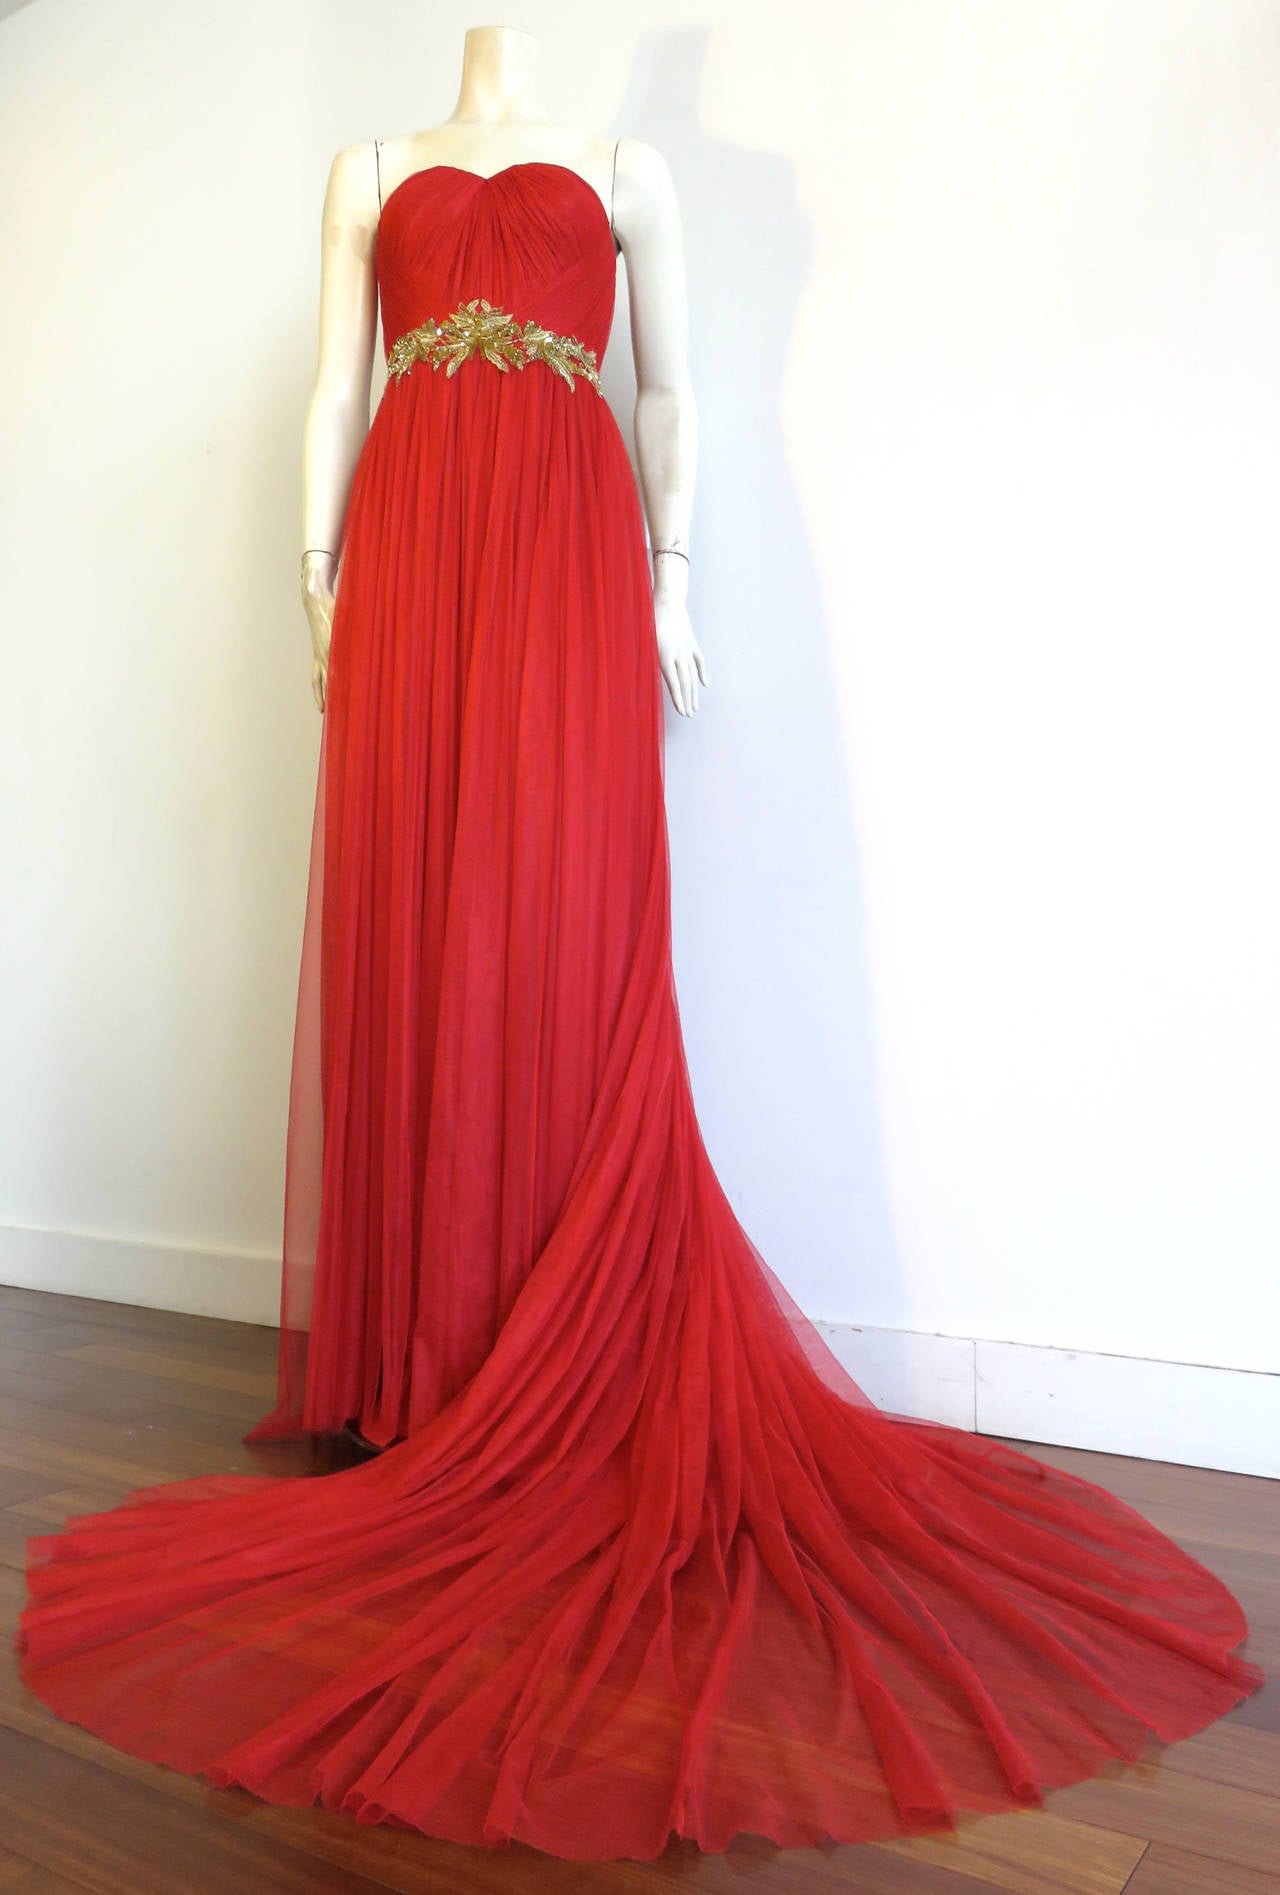 Worn once for an event, MARCHESA Scarlett red & metallic gold evening gown.

This stunning evening dress is made of gathered tulle atop nude-tone silk foundation/lining.

The waist features a gorgeous, leaf embroidery in metallic gold threads